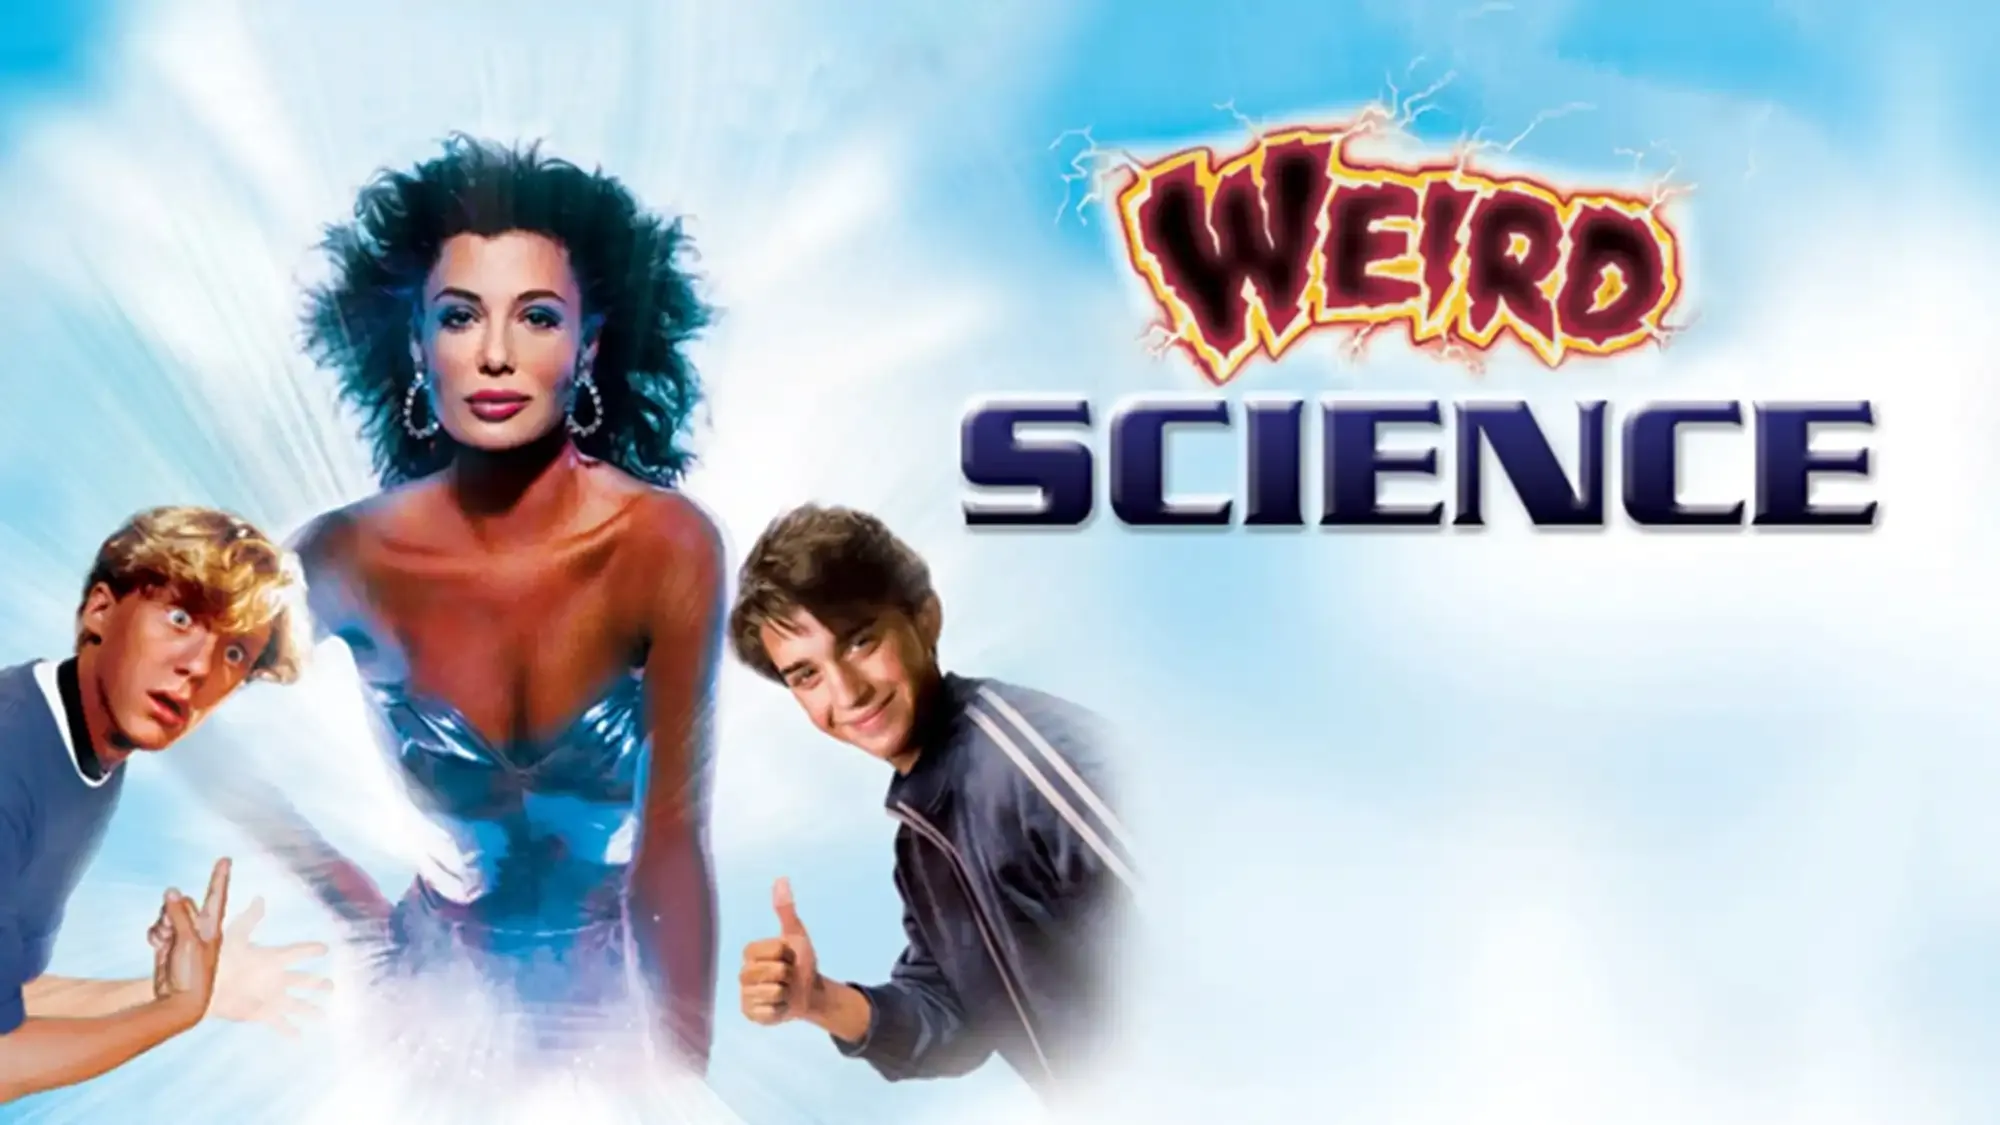 Weird Science movie review